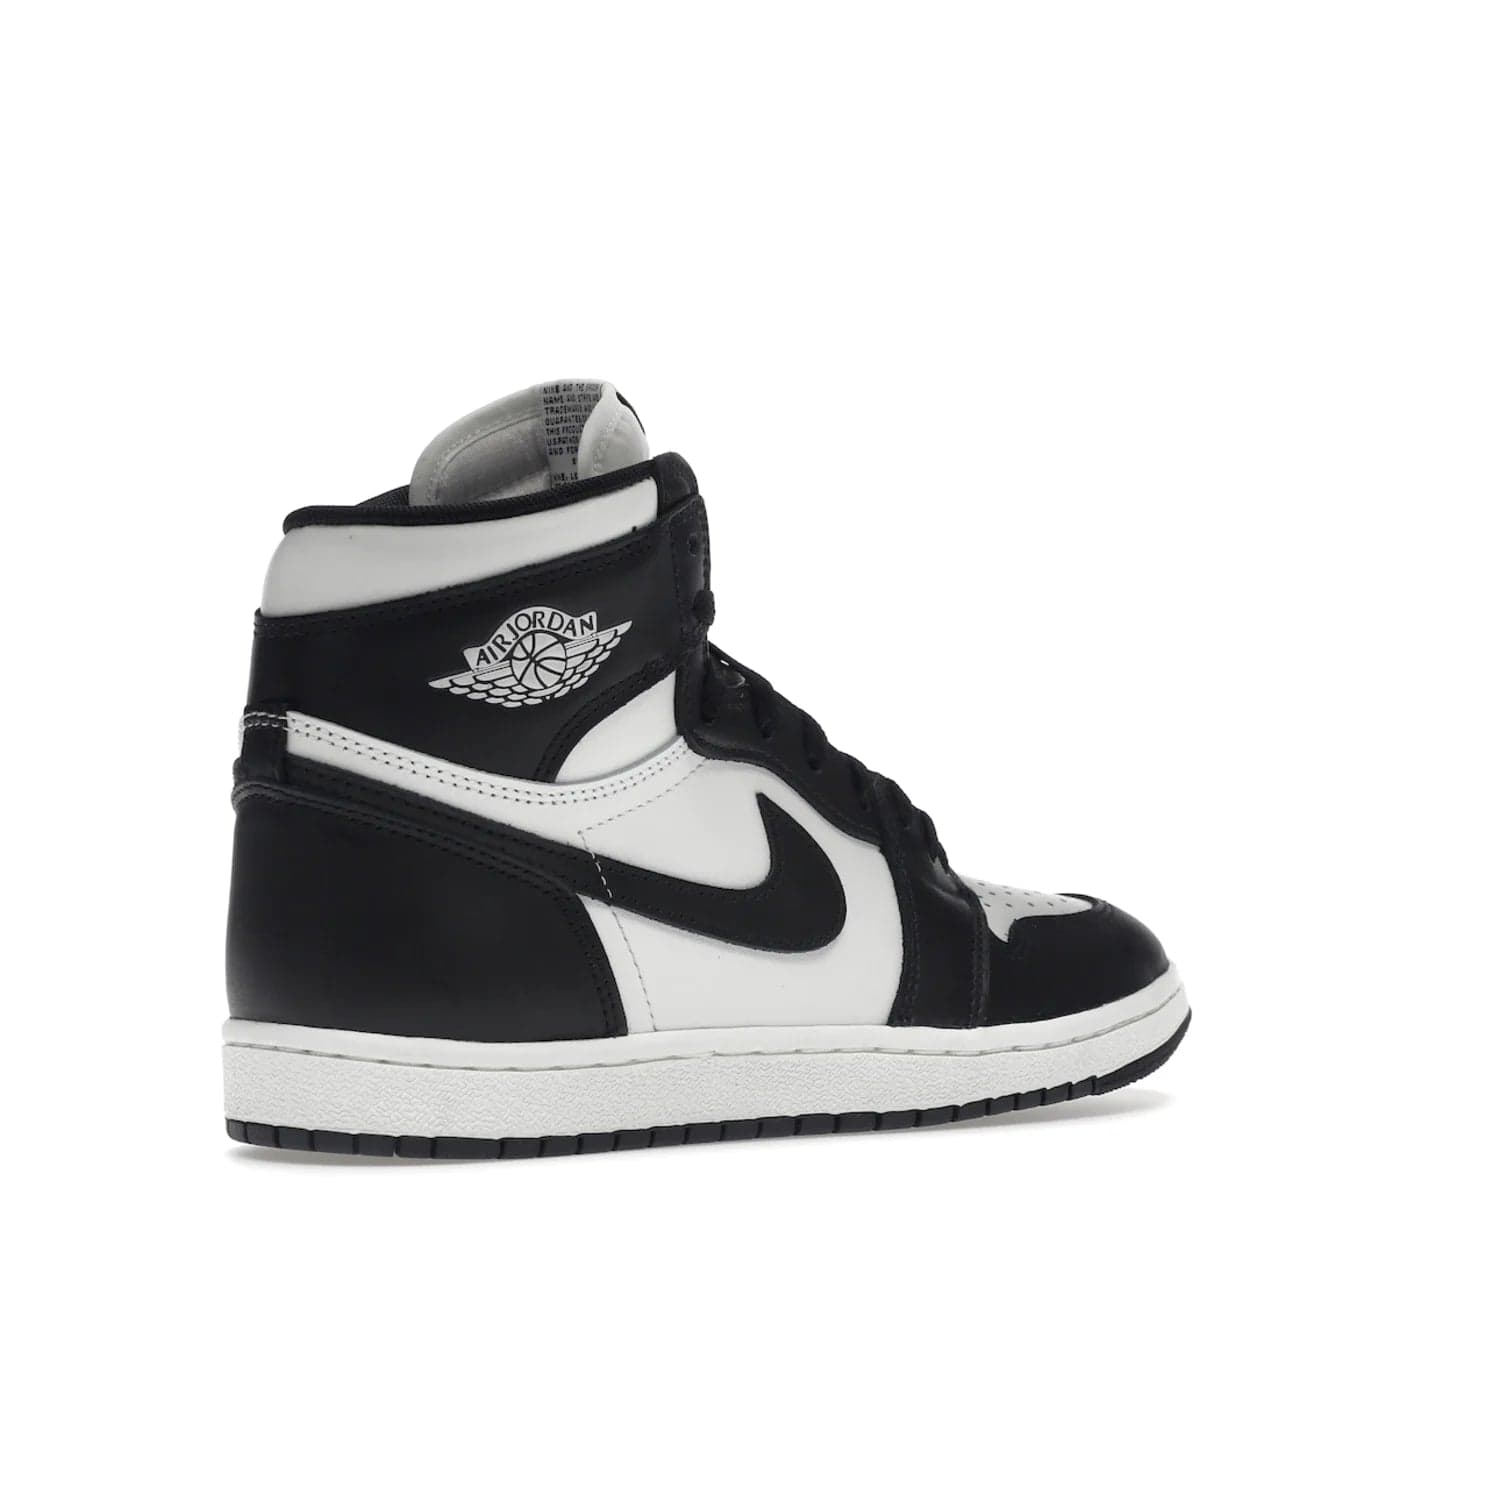 Jordan 1 Retro High 85 Black White (2023) - Image 33 - Only at www.BallersClubKickz.com - Brand new Jordan 1 Retro High 85 Black White (2023) now available. A classic color scheme of black and white leather uppers with signature Nike Air logo on the tongue. Must-have for any Air Jordan fan. Available February 15, 2023.